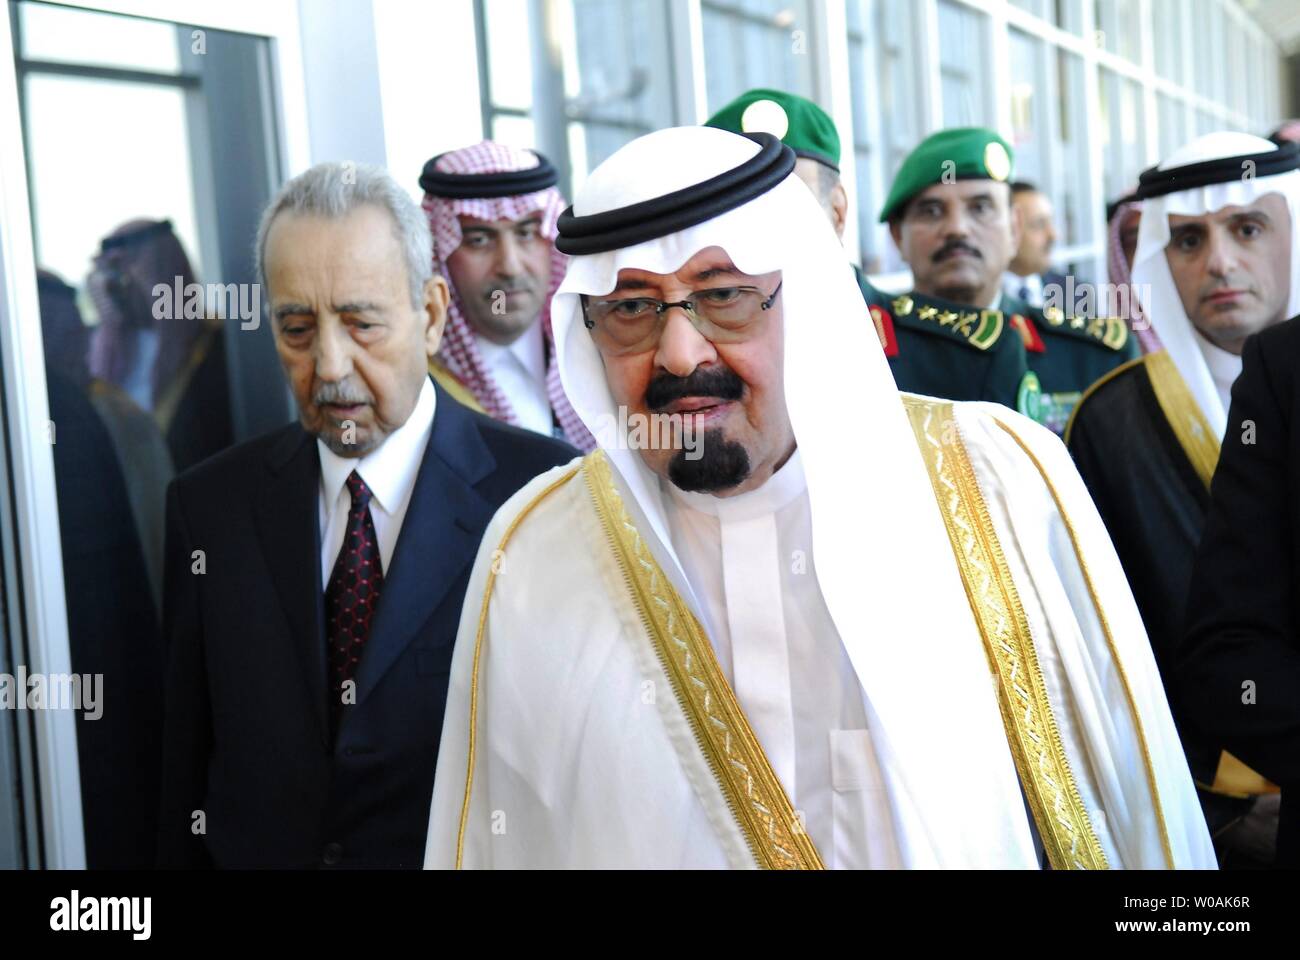 King Abdallah bin Abdulaziz al Saud is greeted as he arrives at Toronto International Airport to attend the G-8 and G-20 Summits in Huntsville and Toronto, Ontario on Friday June 25, 2010.  UPI/Simon Wilson. Stock Photo